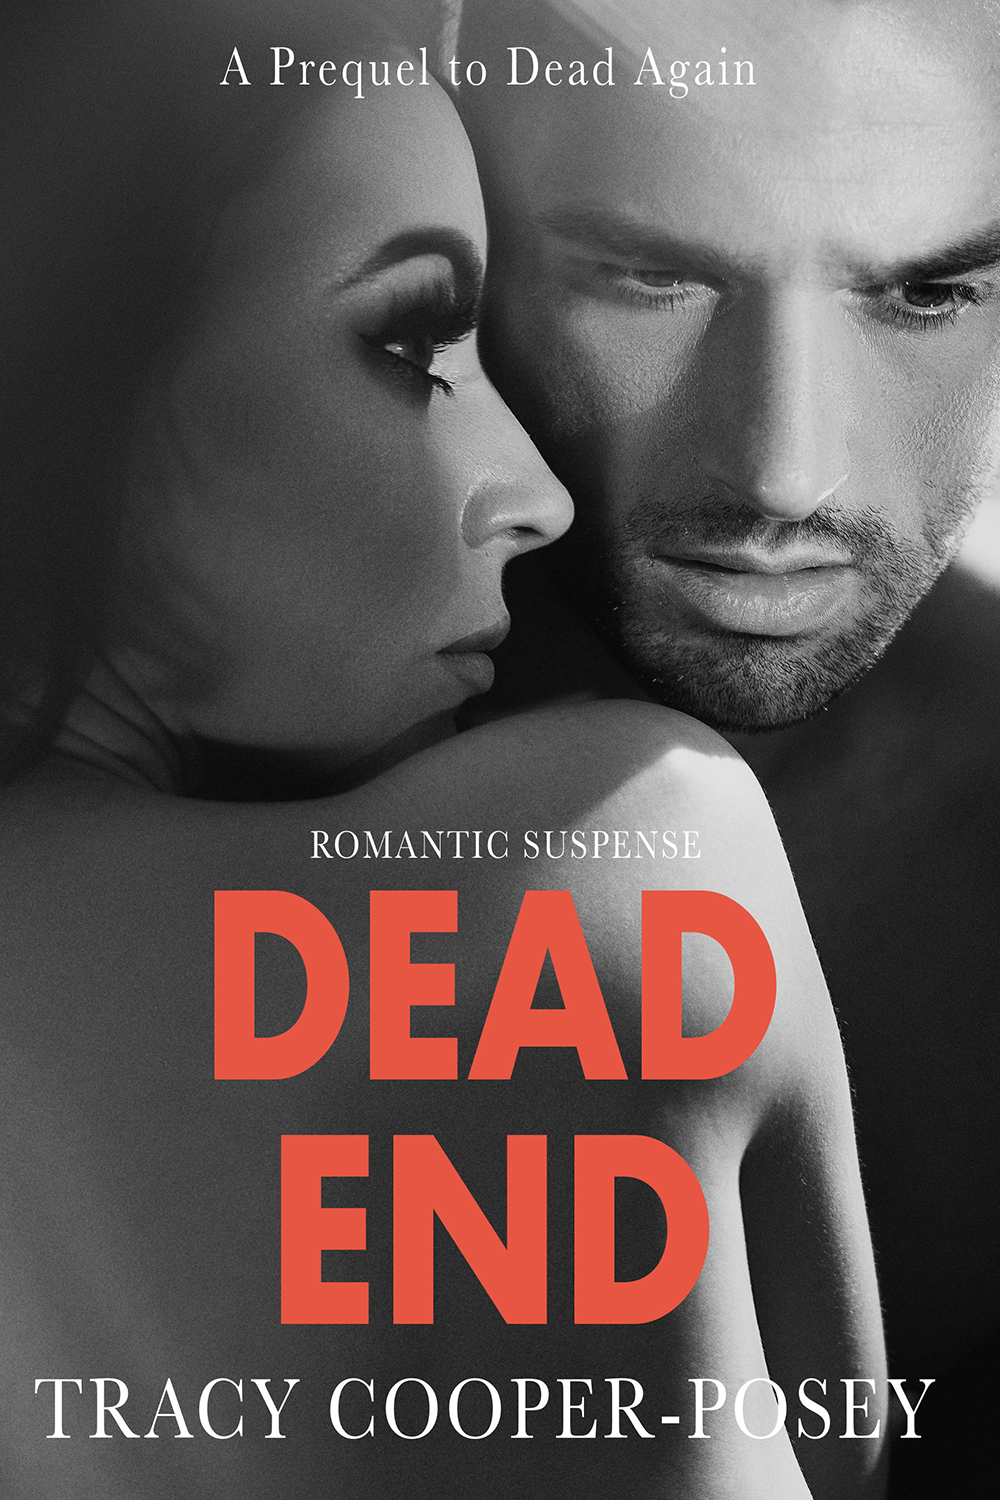 Free Romantic Suspense stories to scoop up and read